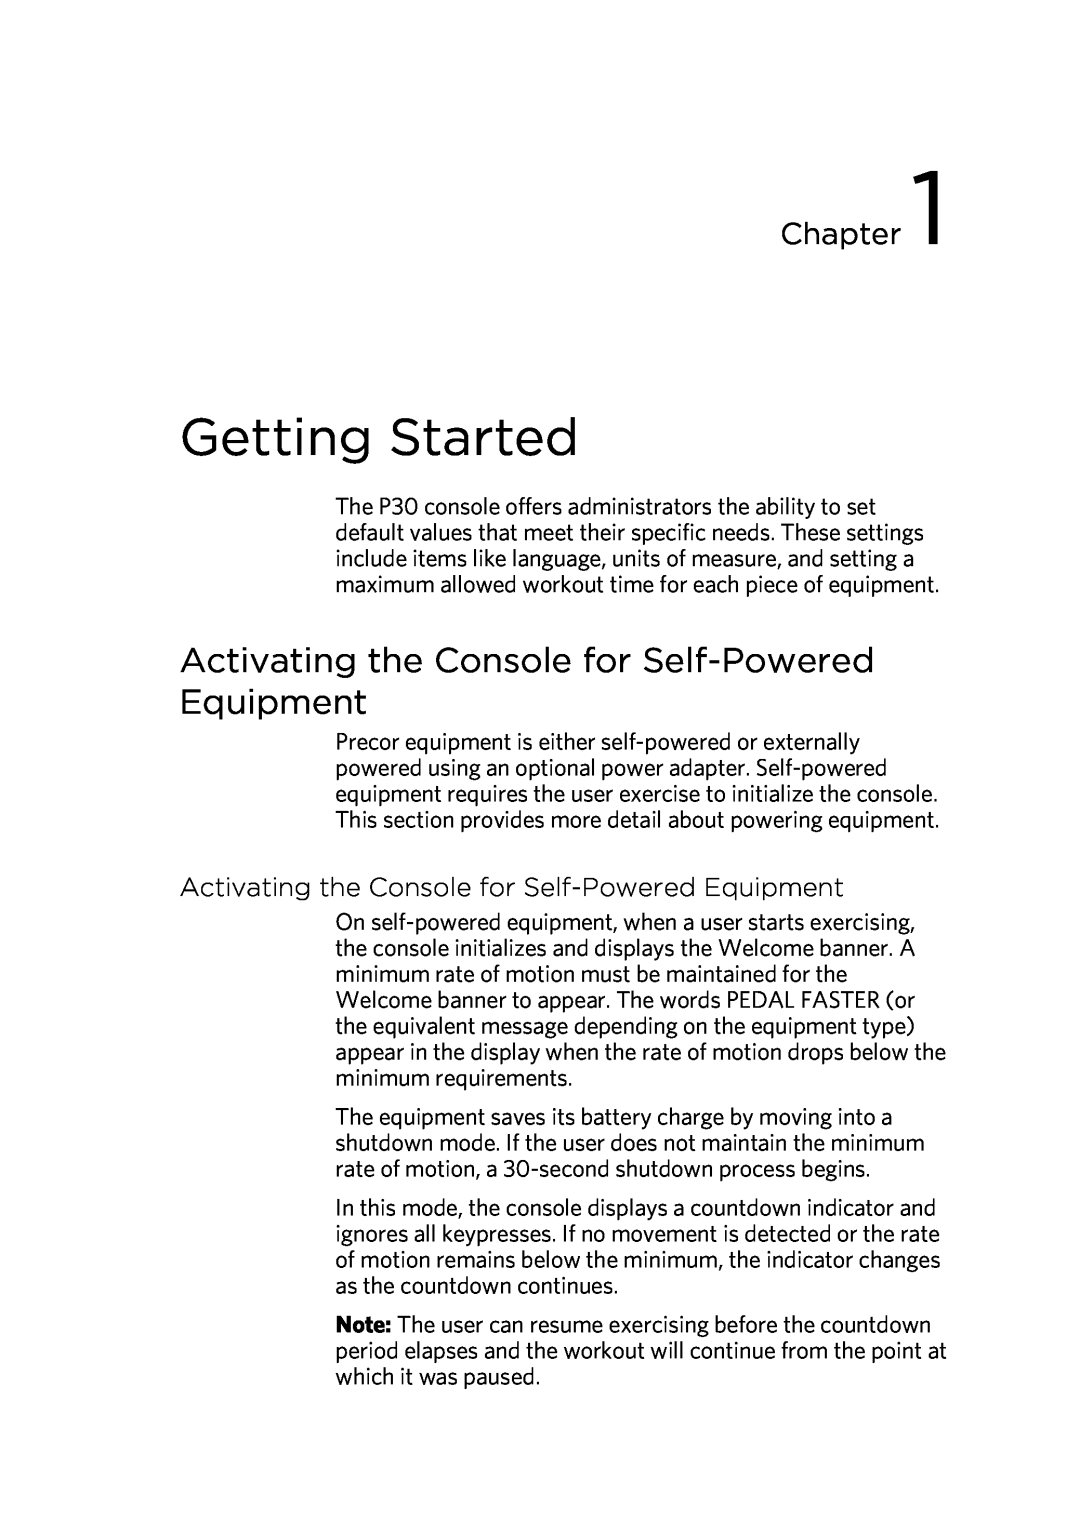 Precor P30 manual Getting Started, Activating the Console for Self-Powered Equipment, Chapter 